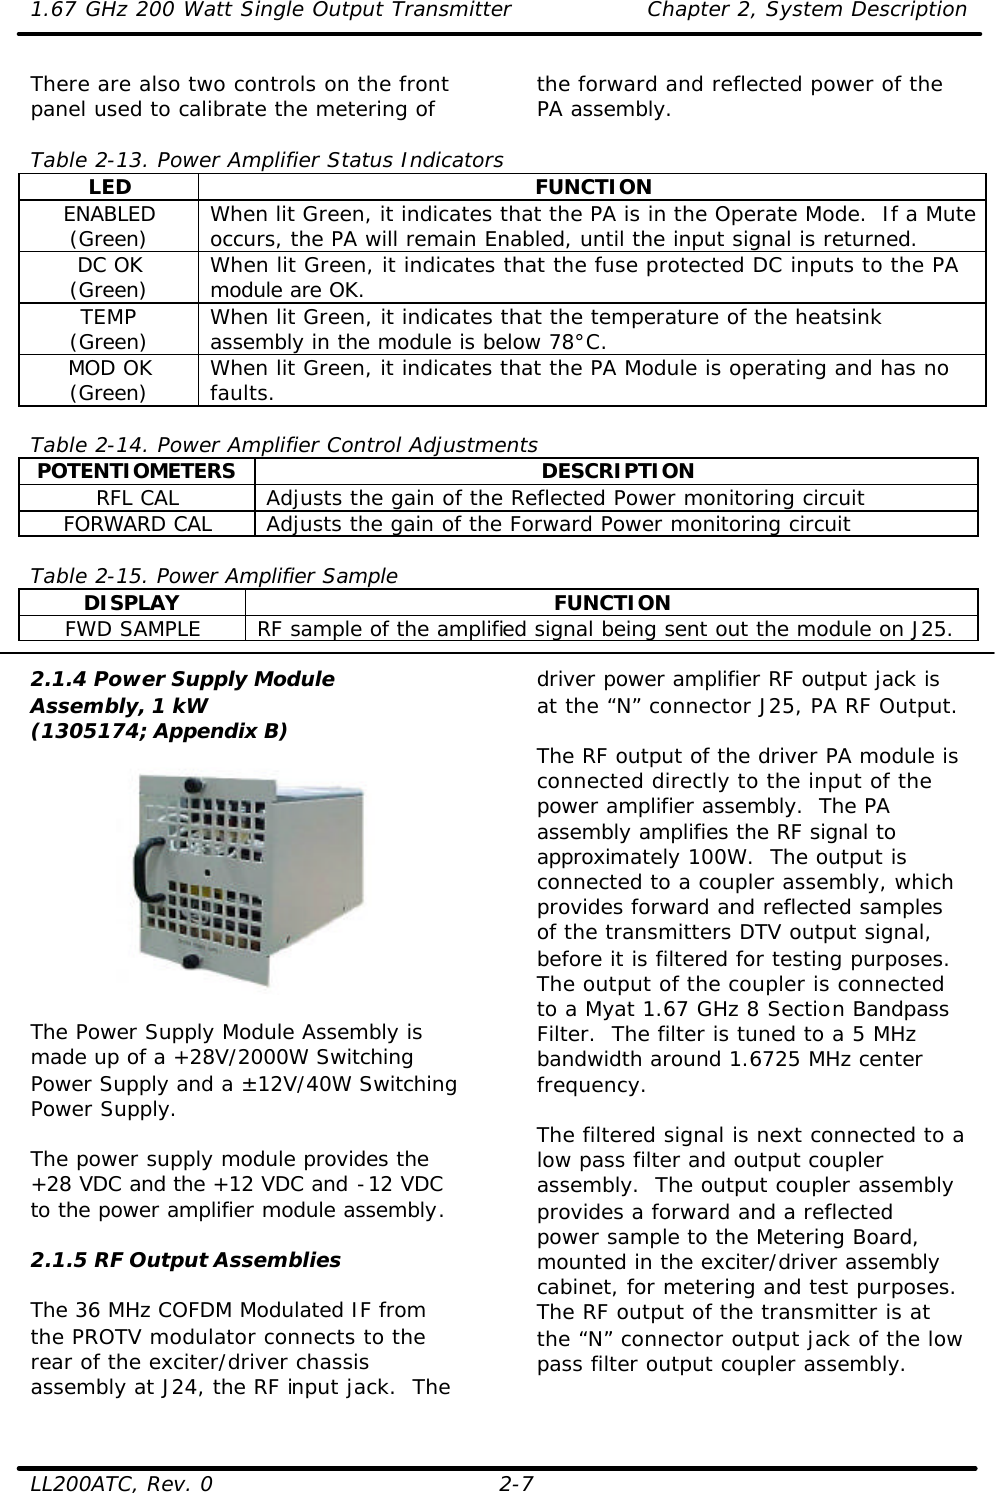 1.67 GHz 200 Watt Single Output Transmitter Chapter 2, System Description  LL200ATC, Rev. 0 2-7 There are also two controls on the front panel used to calibrate the metering of  the forward and reflected power of the PA assembly.    Table 2-13. Power Amplifier Status Indicators LED FUNCTION ENABLED (Green) When lit Green, it indicates that the PA is in the Operate Mode.  If a Mute occurs, the PA will remain Enabled, until the input signal is returned. DC OK (Green) When lit Green, it indicates that the fuse protected DC inputs to the PA module are OK. TEMP (Green) When lit Green, it indicates that the temperature of the heatsink assembly in the module is below 78°C. MOD OK (Green) When lit Green, it indicates that the PA Module is operating and has no faults.  Table 2-14. Power Amplifier Control Adjustments POTENTIOMETERS DESCRIPTION RFL CAL Adjusts the gain of the Reflected Power monitoring circuit FORWARD CAL Adjusts the gain of the Forward Power monitoring circuit  Table 2-15. Power Amplifier Sample DISPLAY FUNCTION FWD SAMPLE RF sample of the amplified signal being sent out the module on J25.  2.1.4 Power Supply Module Assembly, 1 kW (1305174; Appendix B)    The Power Supply Module Assembly is made up of a +28V/2000W Switching Power Supply and a ±12V/40W Switching Power Supply.   The power supply module provides the +28 VDC and the +12 VDC and -12 VDC to the power amplifier module assembly.  2.1.5 RF Output Assemblies  The 36 MHz COFDM Modulated IF from the PROTV modulator connects to the rear of the exciter/driver chassis assembly at J24, the RF input jack.  The driver power amplifier RF output jack is at the “N” connector J25, PA RF Output.   The RF output of the driver PA module is connected directly to the input of the power amplifier assembly.  The PA assembly amplifies the RF signal to approximately 100W.  The output is connected to a coupler assembly, which provides forward and reflected samples of the transmitters DTV output signal, before it is filtered for testing purposes.  The output of the coupler is connected to a Myat 1.67 GHz 8 Section Bandpass Filter.  The filter is tuned to a 5 MHz bandwidth around 1.6725 MHz center frequency.  The filtered signal is next connected to a low pass filter and output coupler assembly.  The output coupler assembly provides a forward and a reflected power sample to the Metering Board, mounted in the exciter/driver assembly cabinet, for metering and test purposes.  The RF output of the transmitter is at the “N” connector output jack of the low pass filter output coupler assembly. 